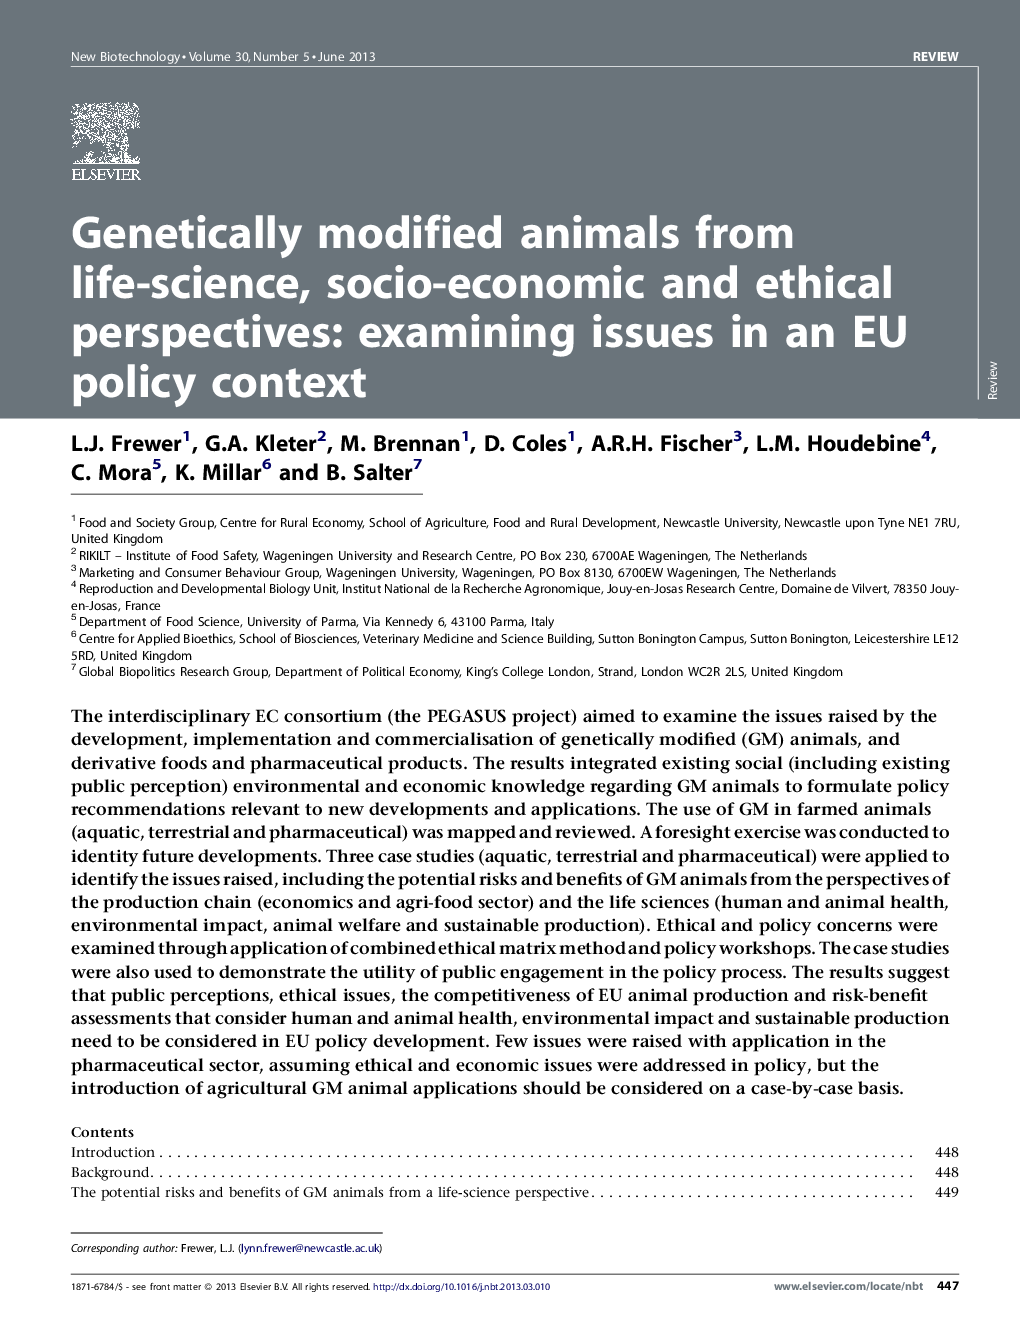 Genetically modified animals from life-science, socio-economic and ethical perspectives: examining issues in an EU policy context